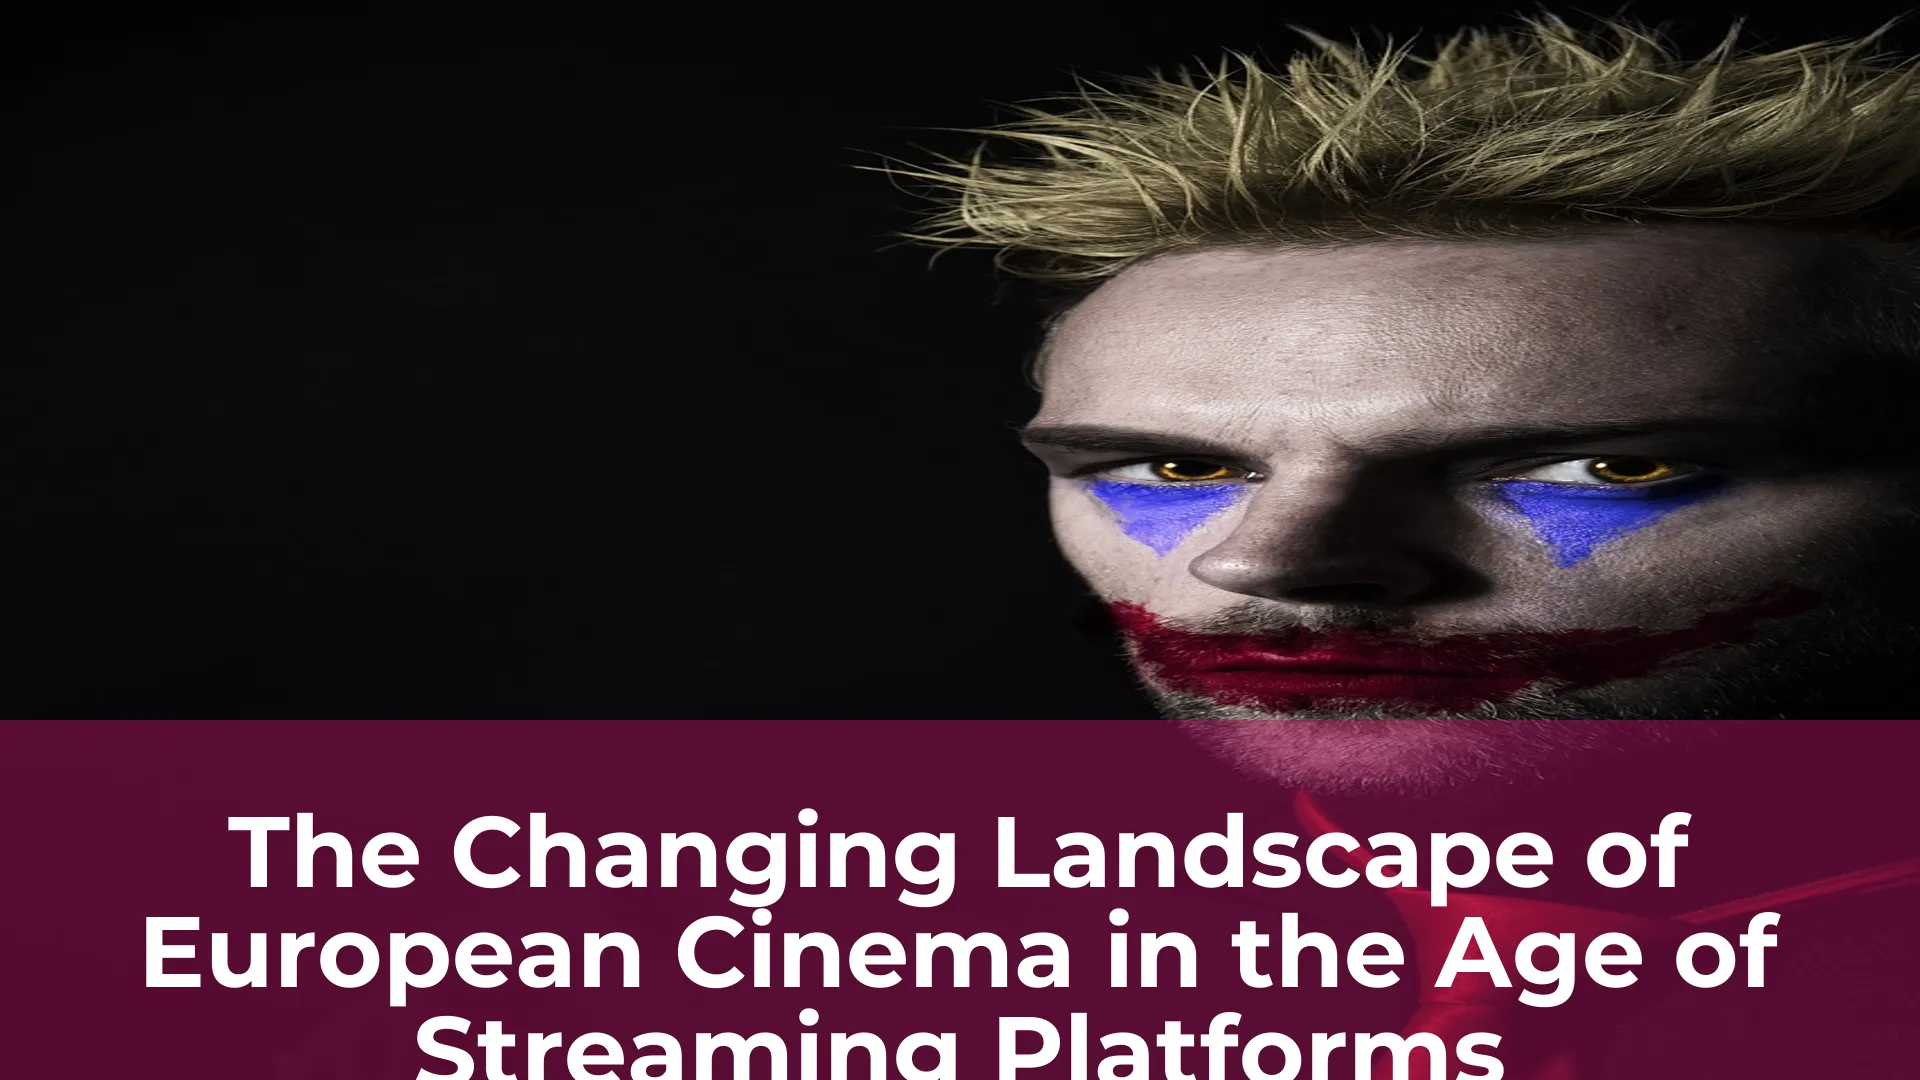 The changing landscape of european cinema in the age of streaming platforms